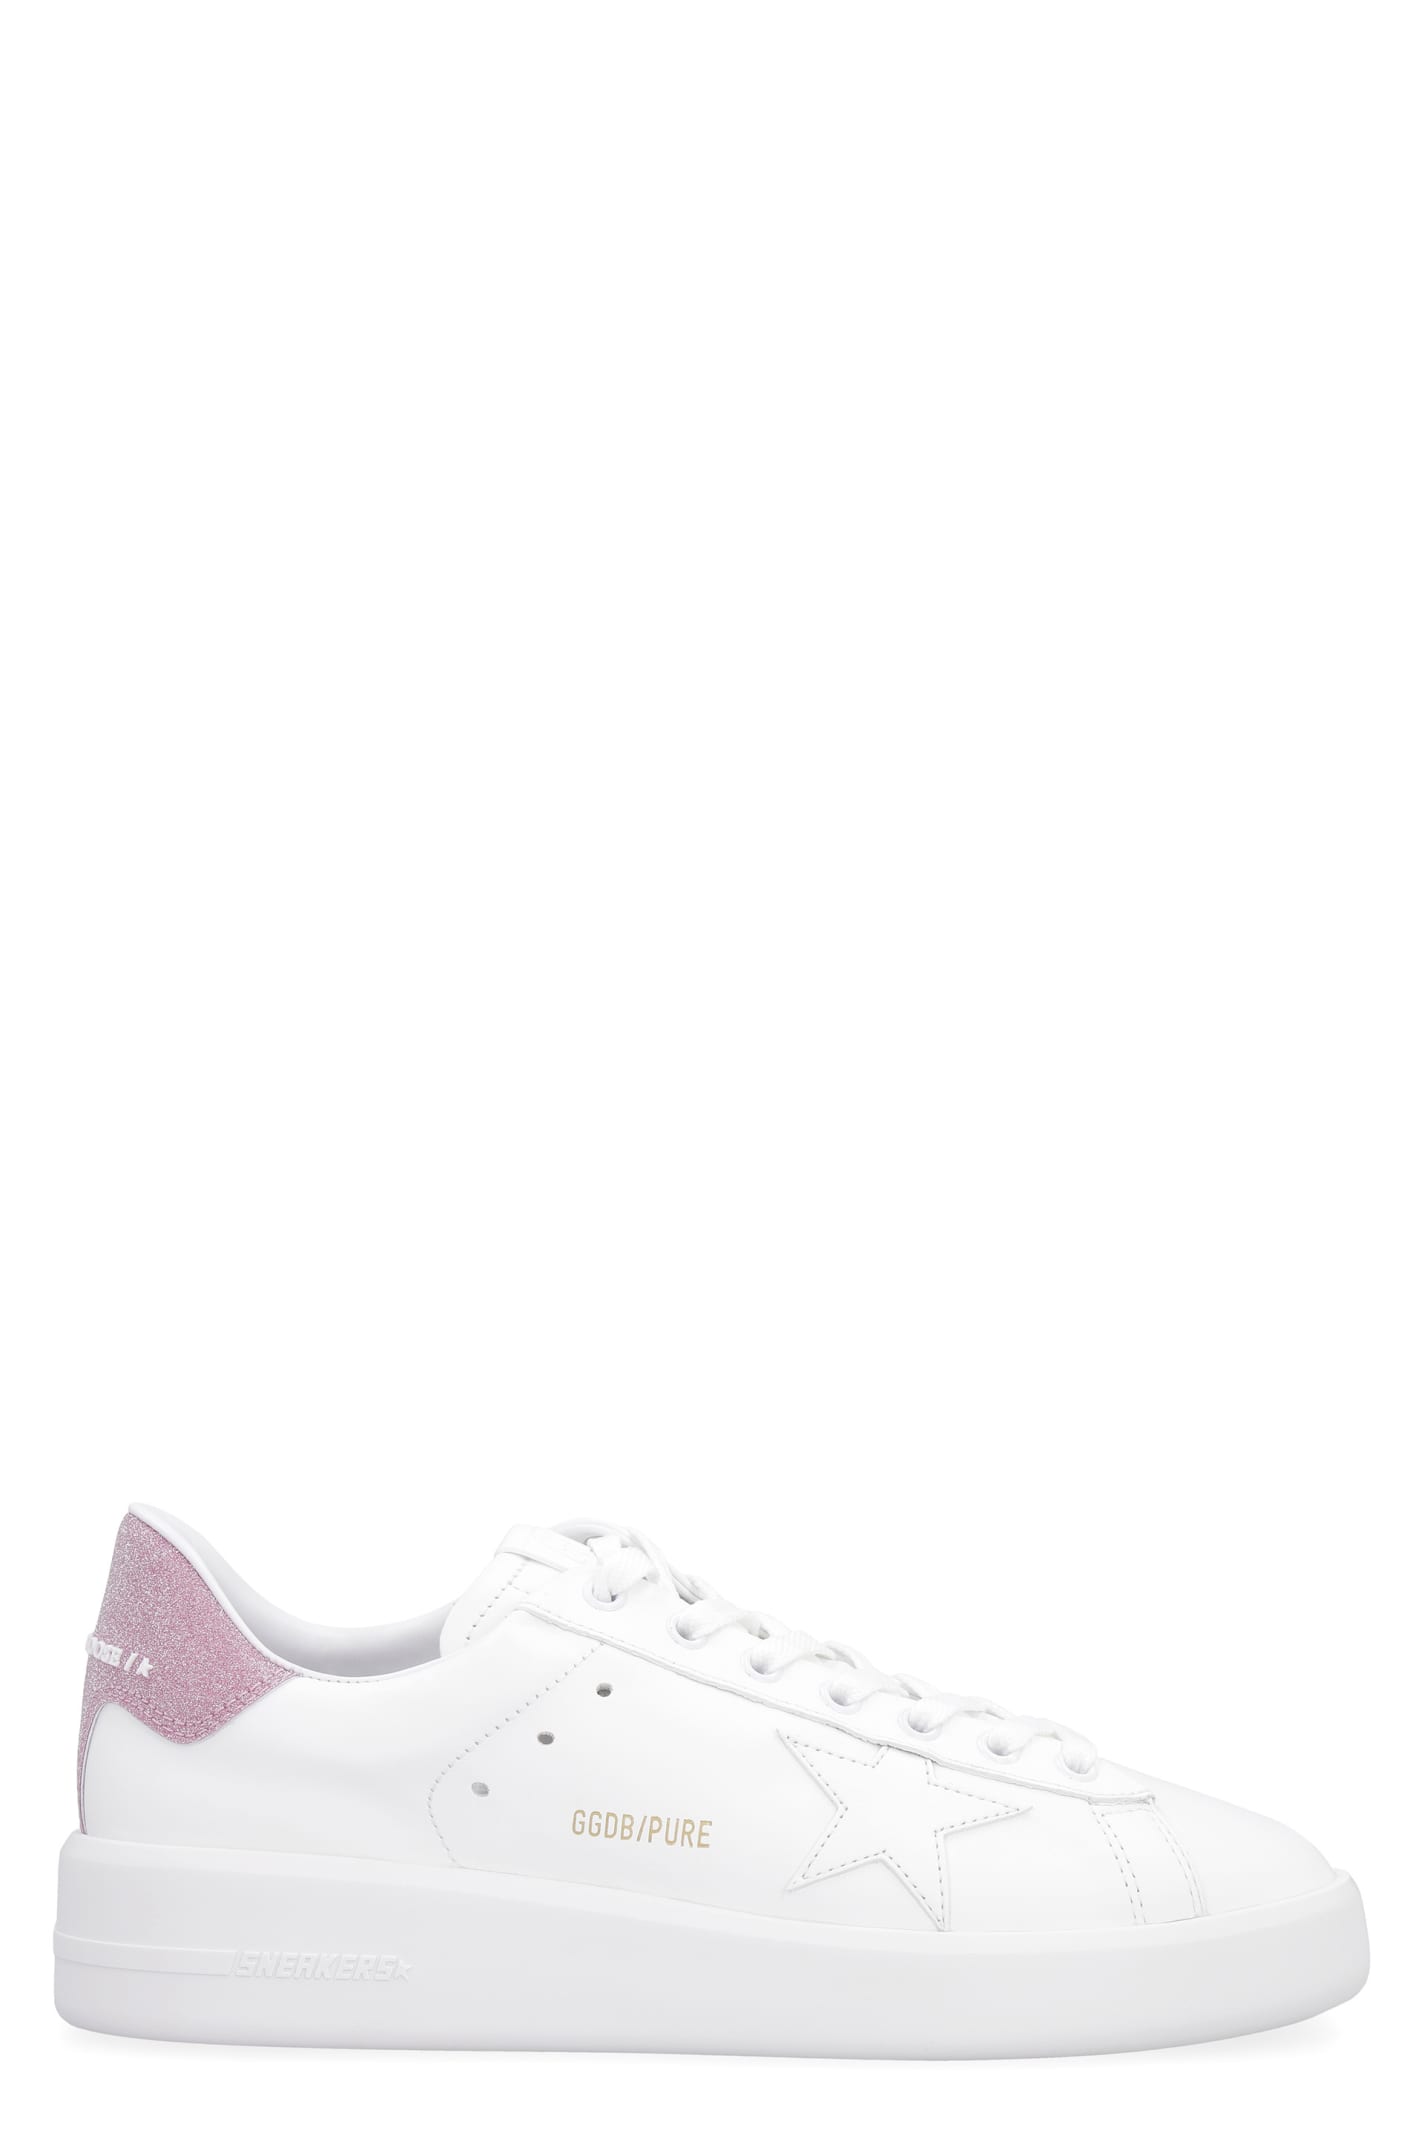 Buy Golden Goose Pure New Low-top Sneakers online, shop Golden Goose shoes with free shipping